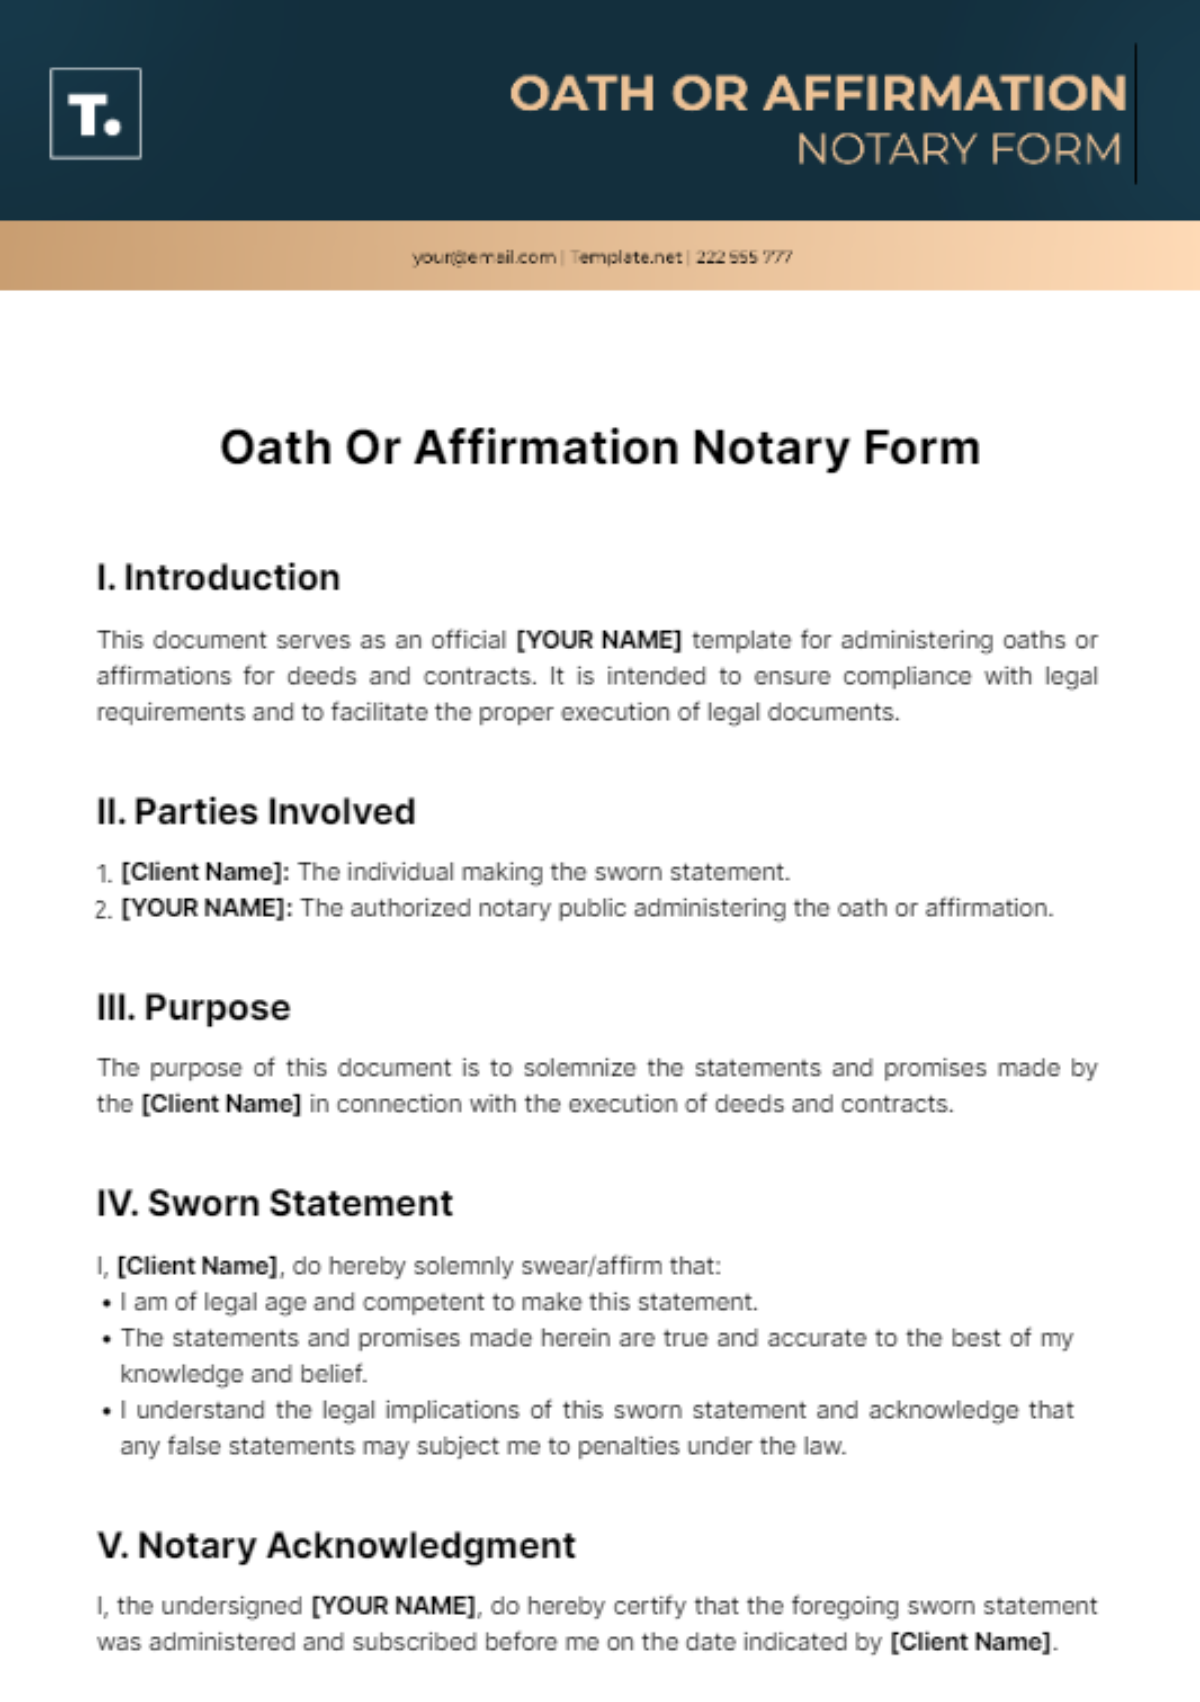 Oath Or Affirmation Notary Form Template